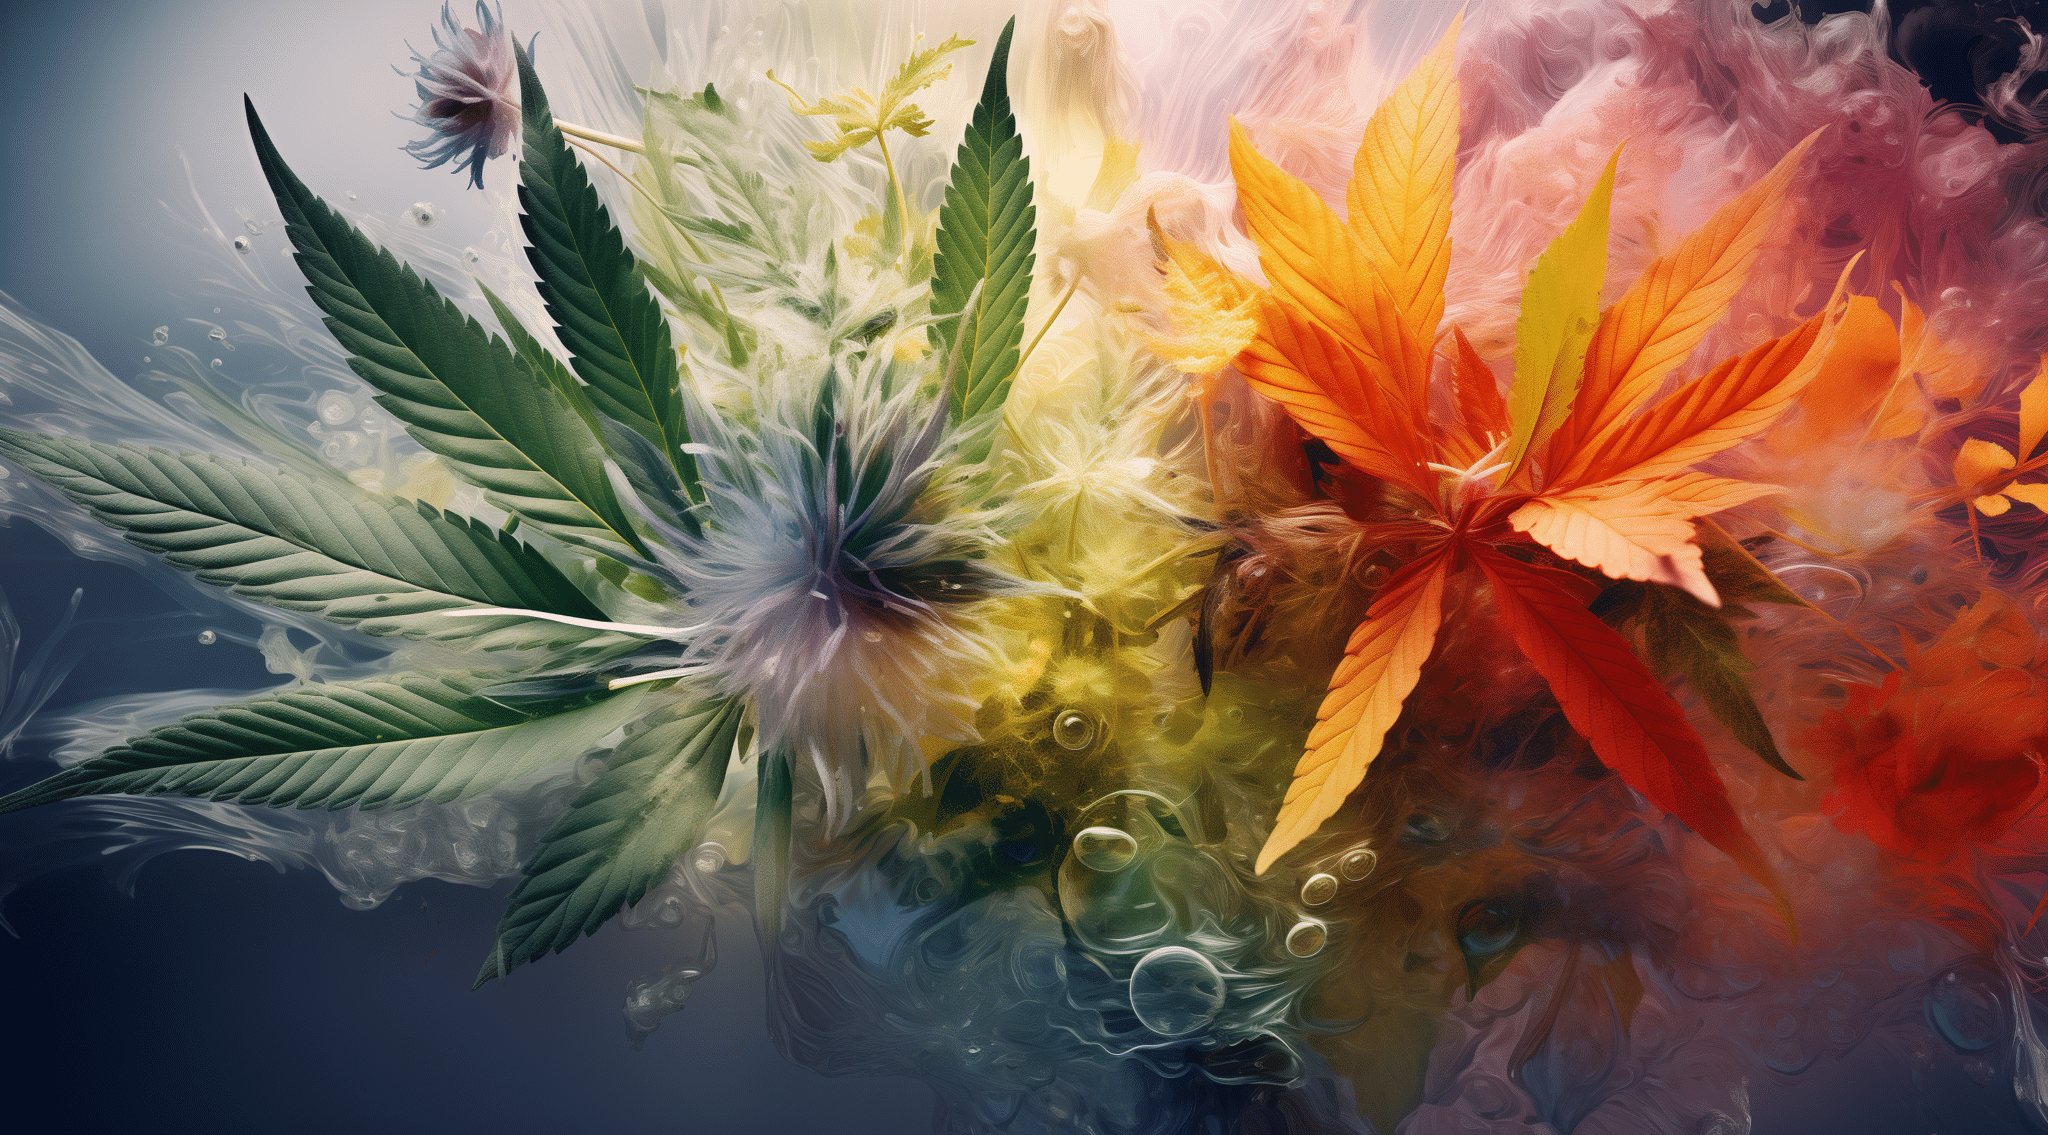 The entourage effect a collage of cannabis compounds